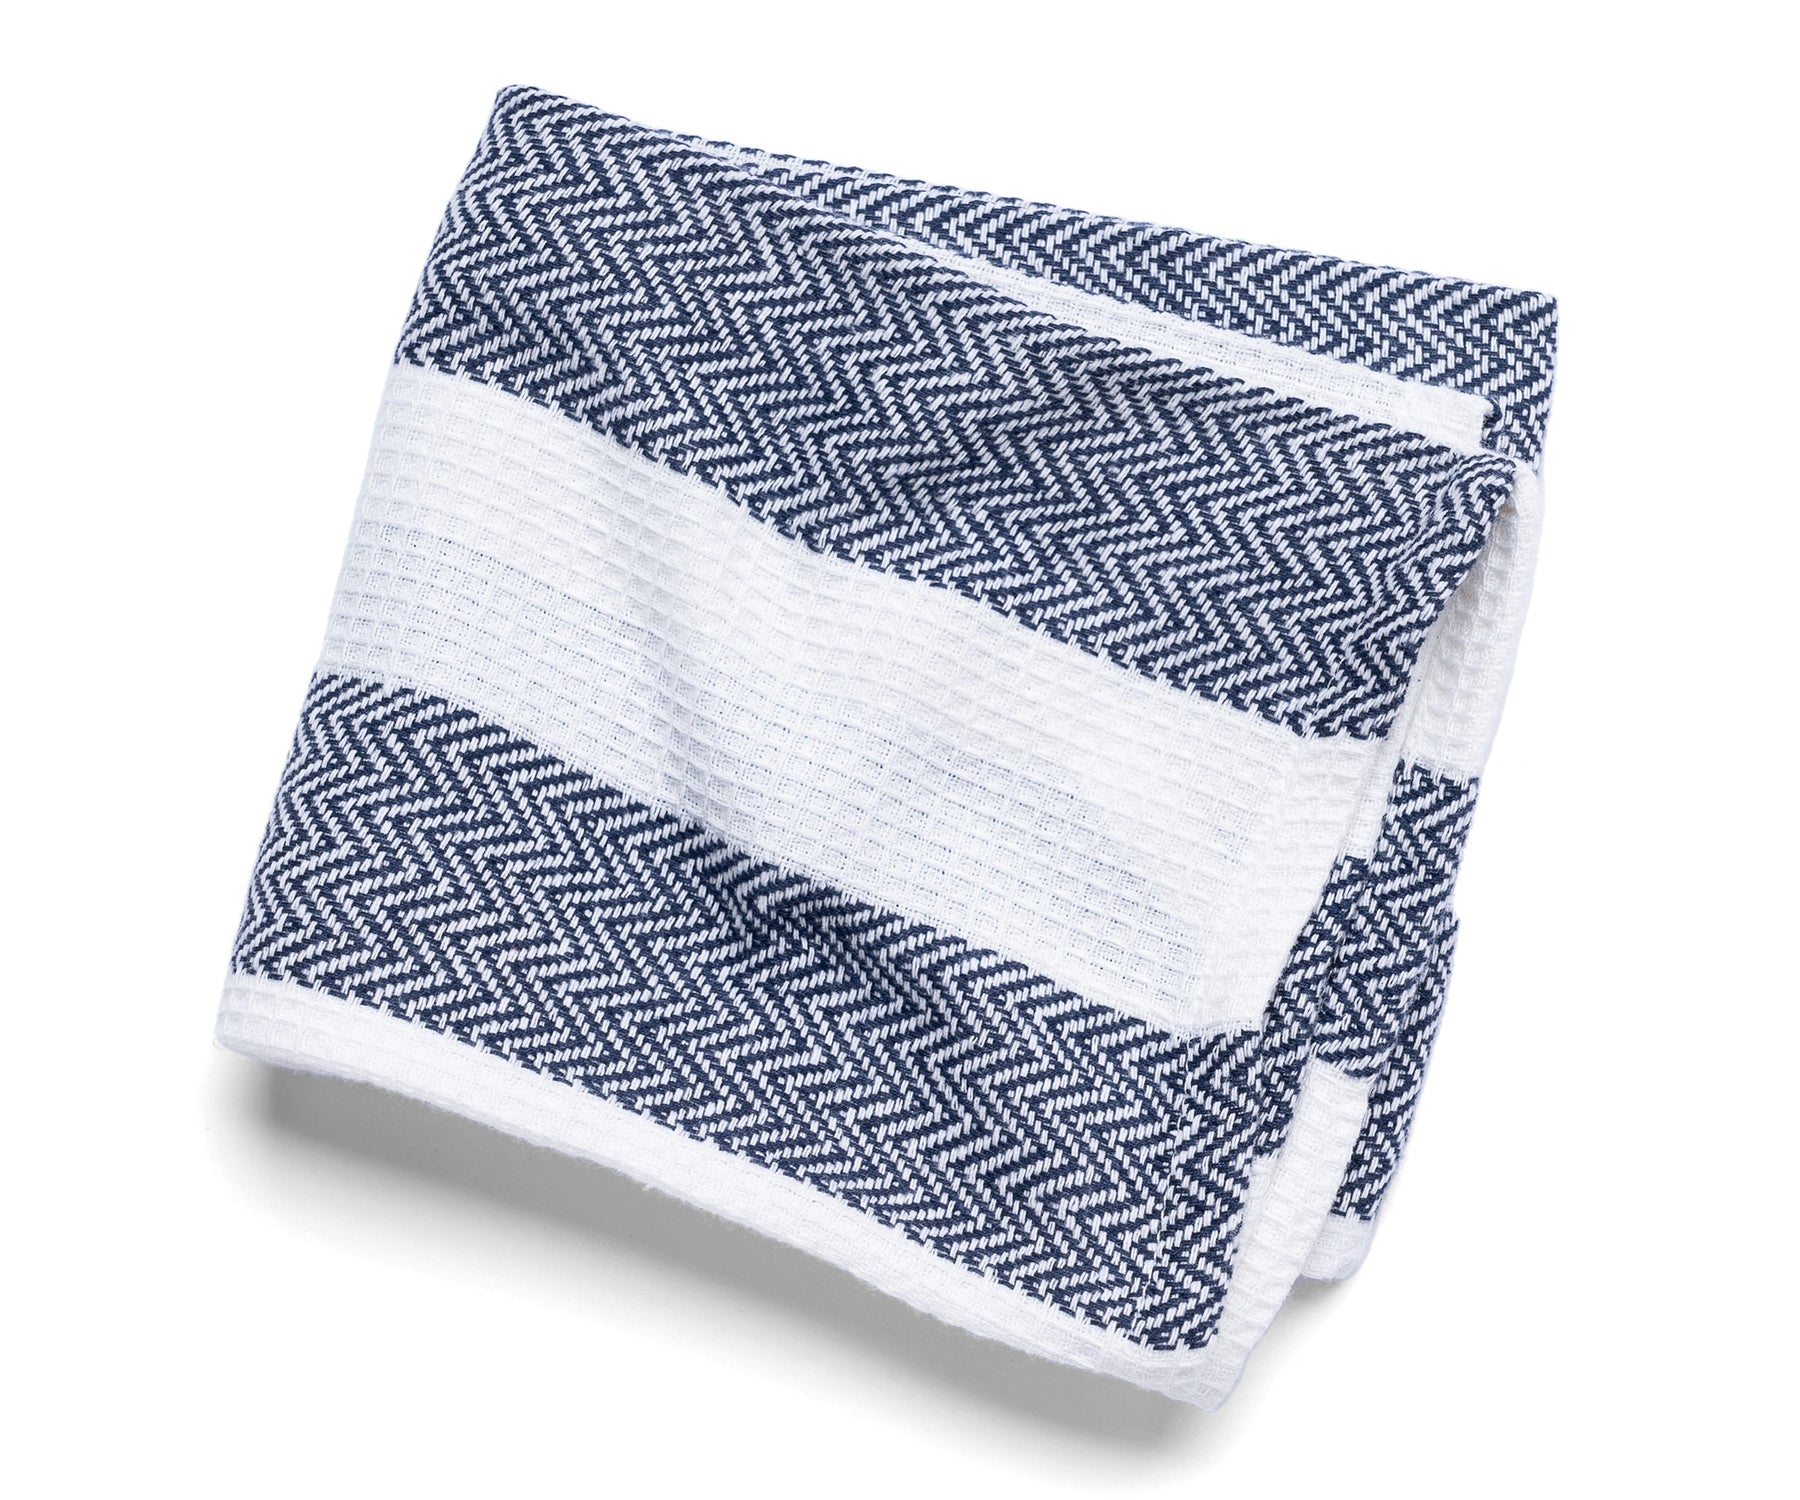 Kitchen towels with stylish stripes, enhancing your kitchen decor.